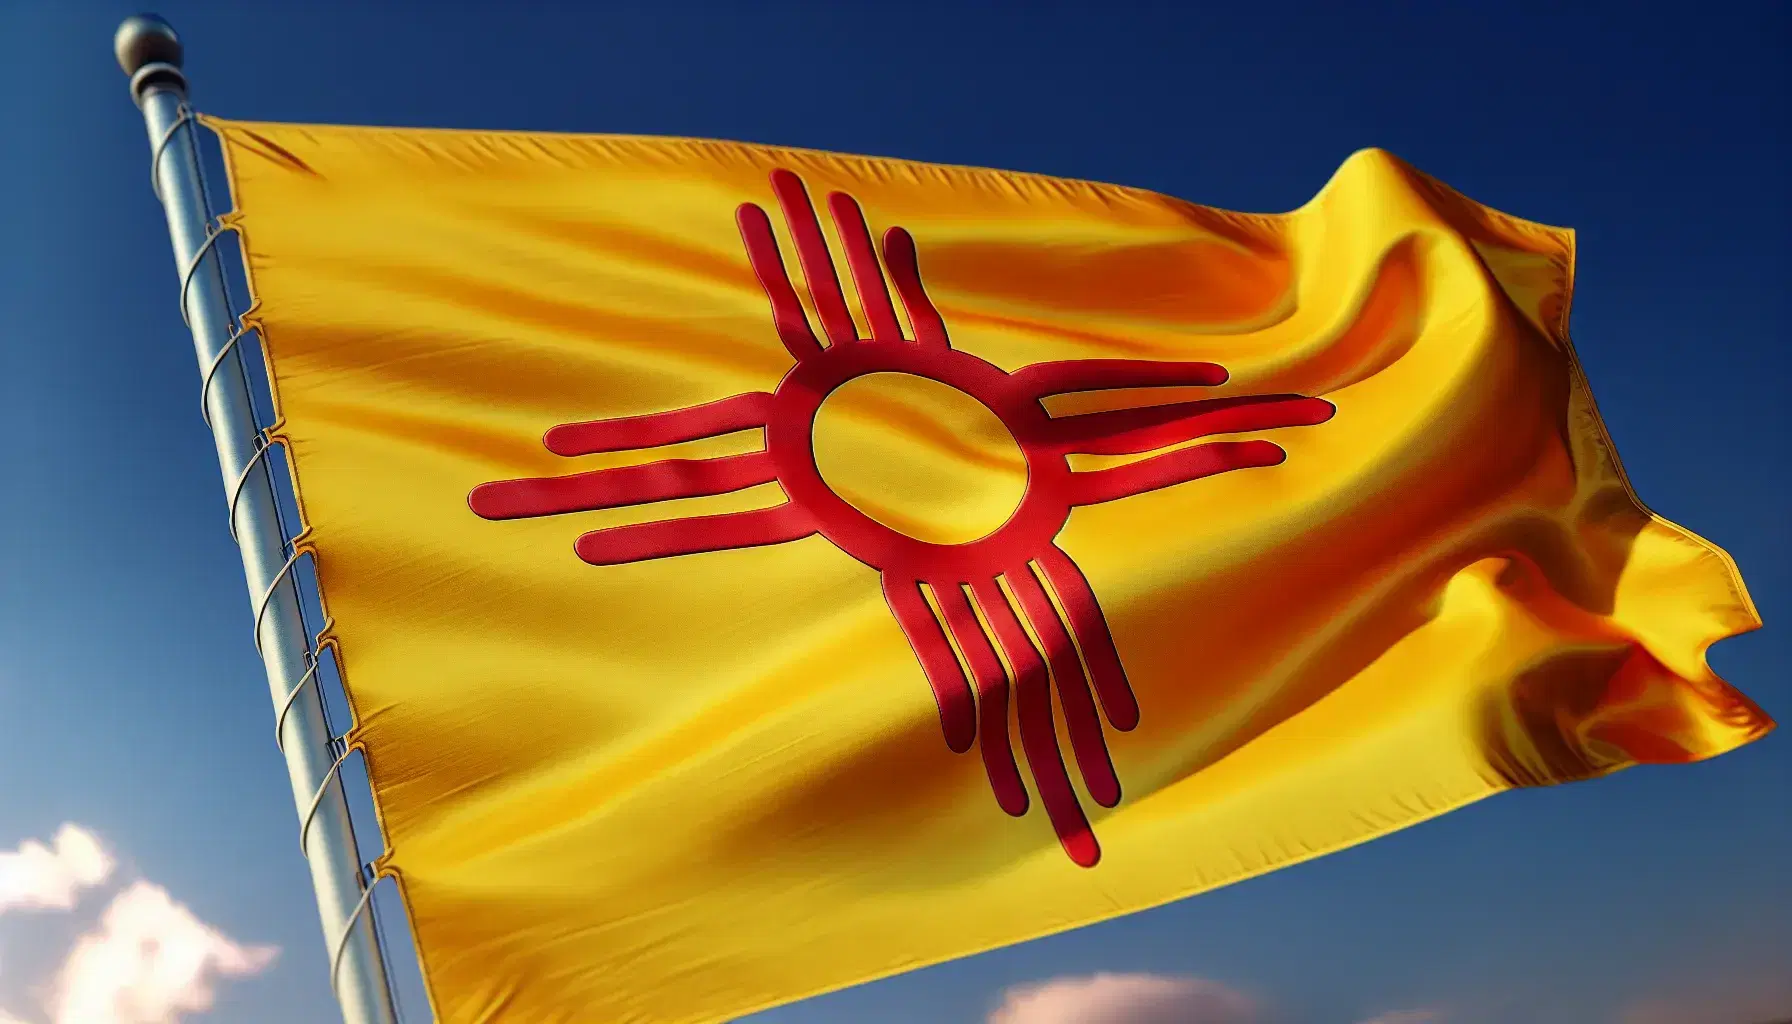 New Mexico state flag with yellow background and red Zia symbol in center, displayed against a clear blue sky.